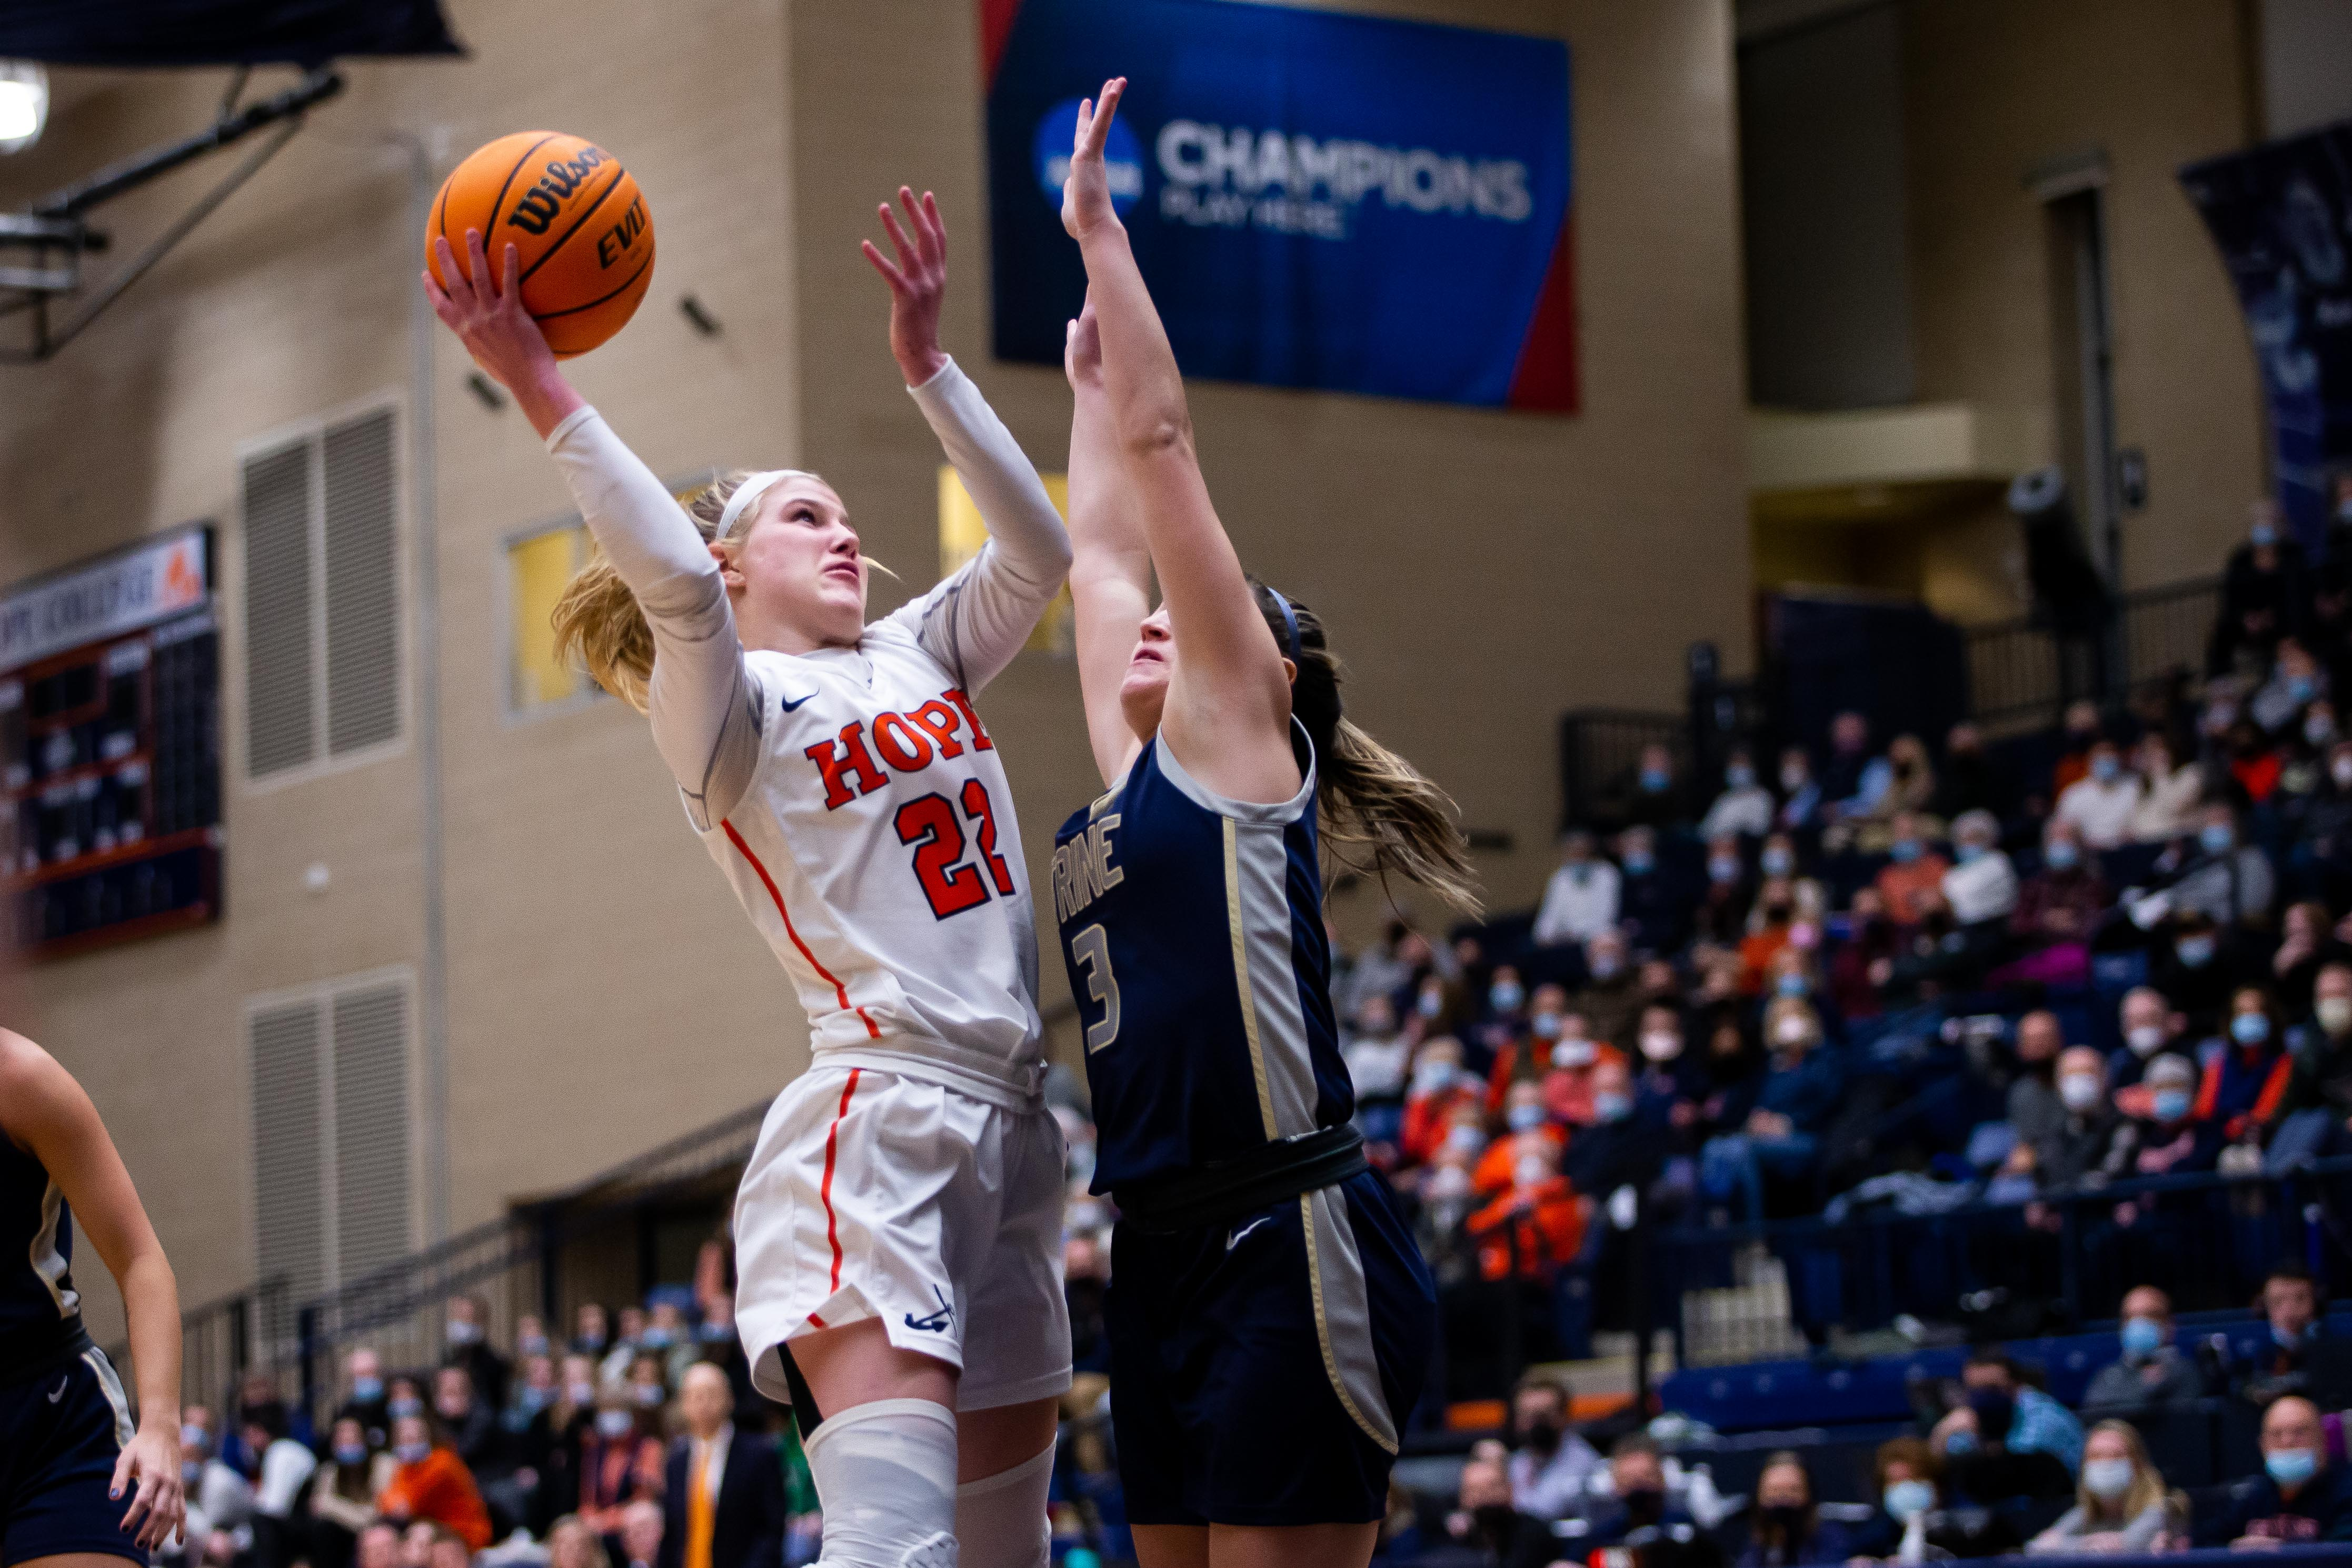 LISTEN: Hope's 61 game win streak snapped by No. 4 Trine